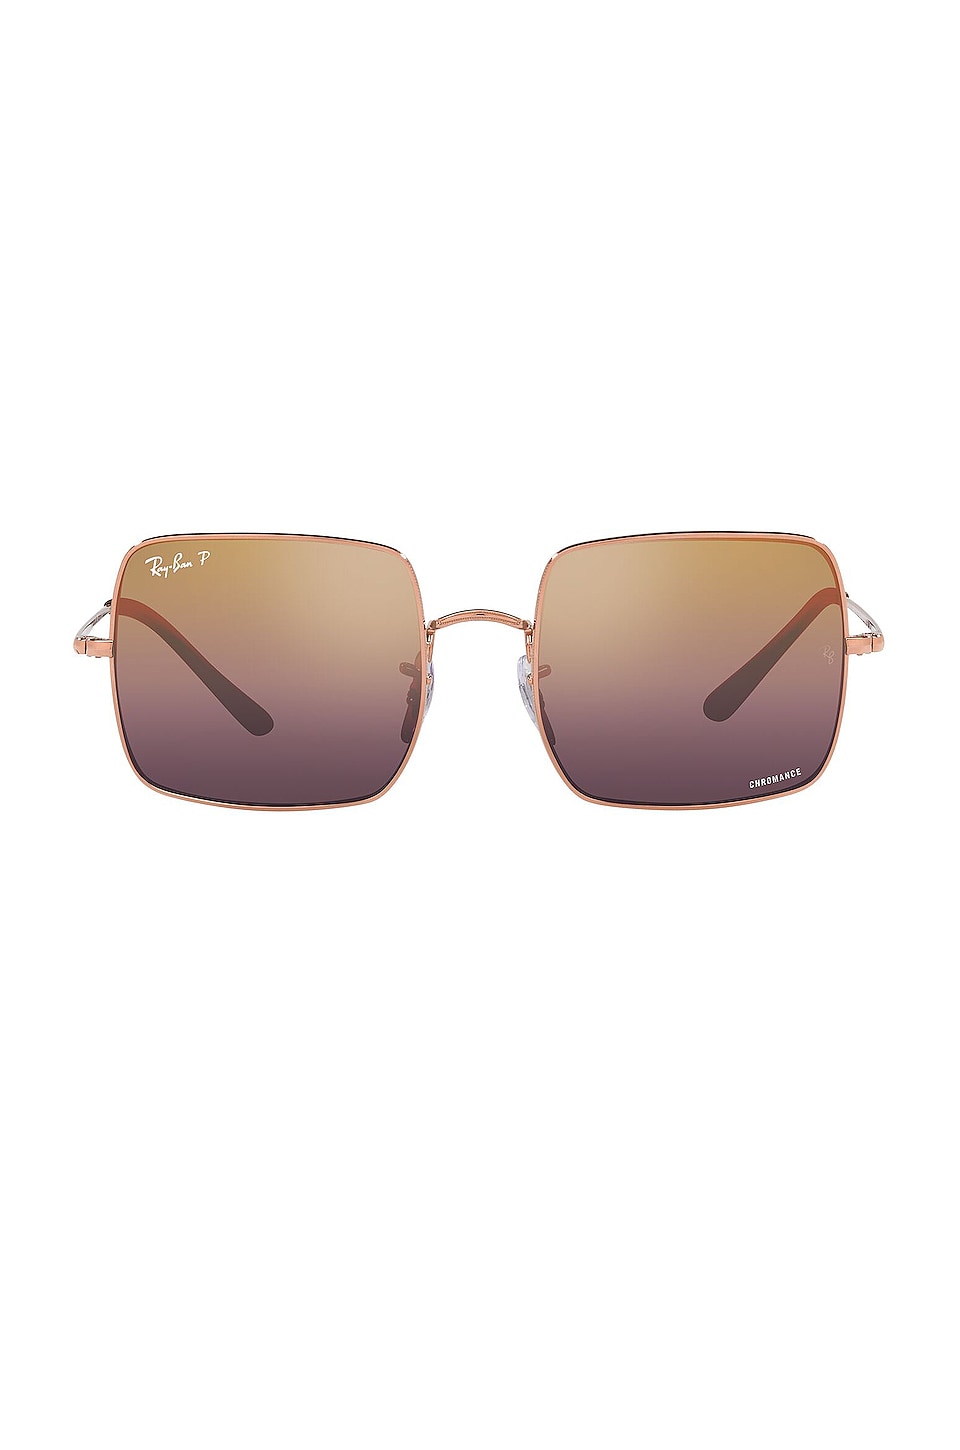 Ray-Ban square sunglasses in gold/brown